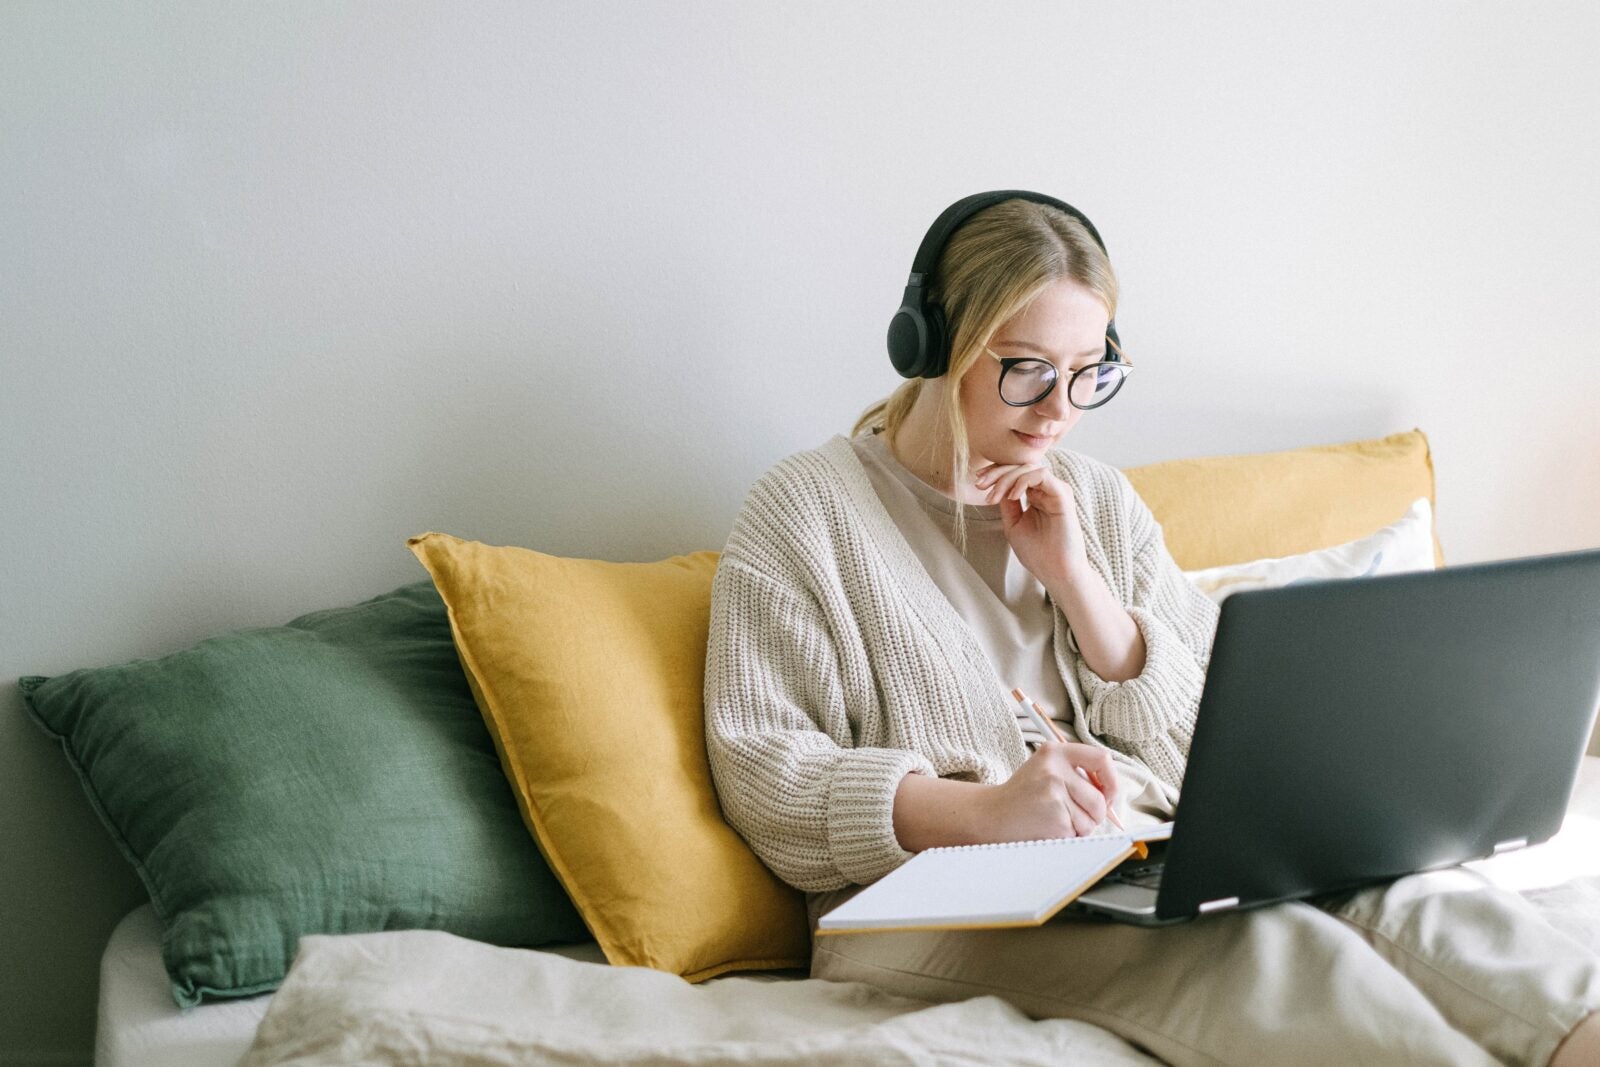 A blonde woman wearing headphones and warm clothes sits on a sofa while using a laptop.